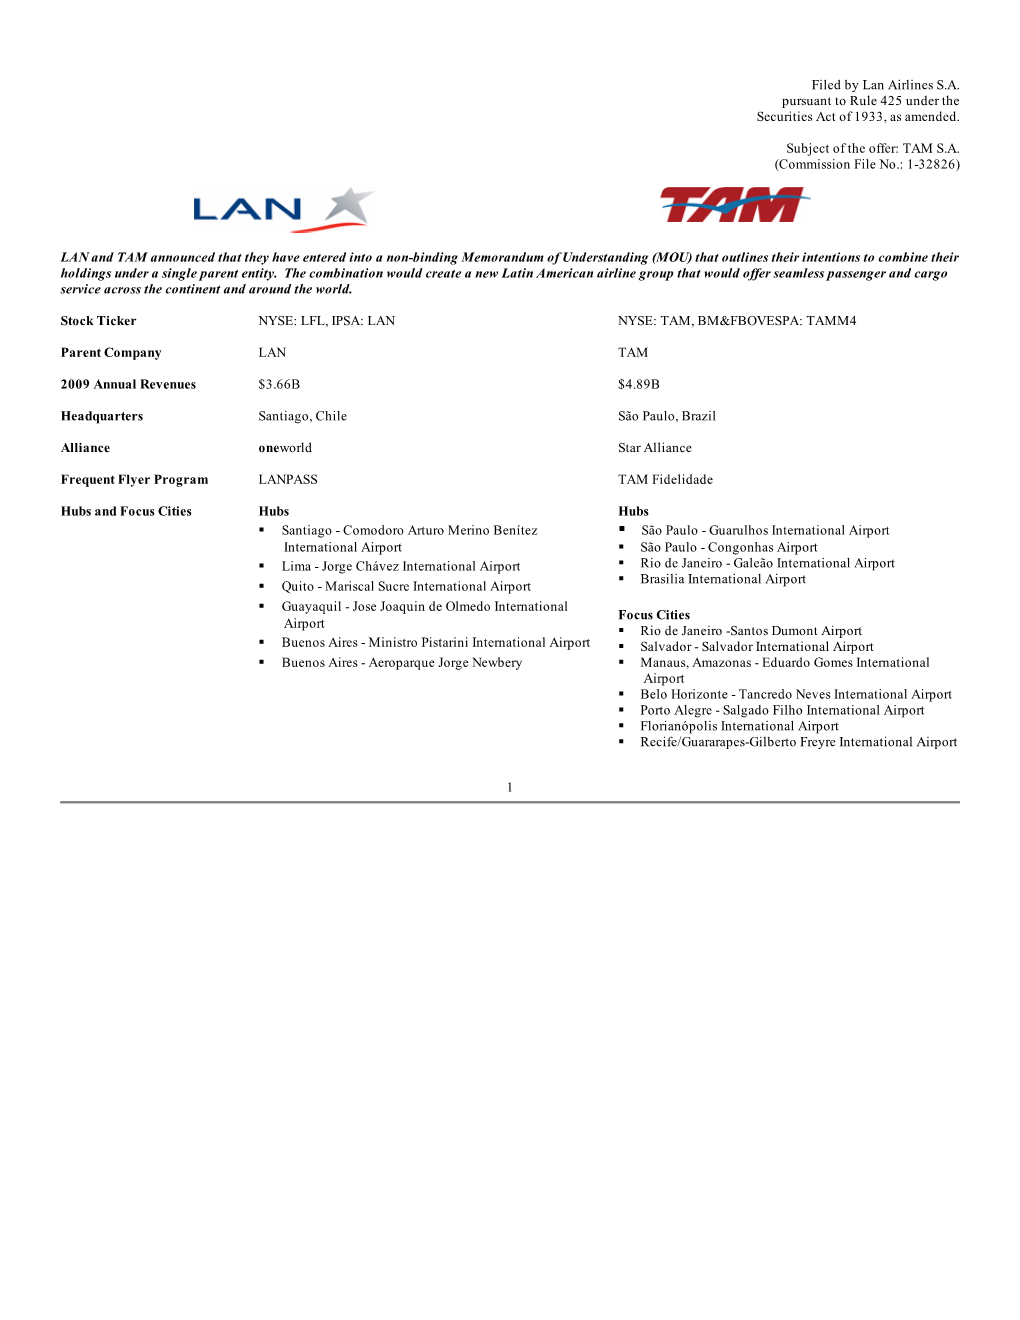 Filed by Lan Airlines SA Pursuant to Rule 425 Under the Securities Act of 1933, As Amended. Subject of the Offer